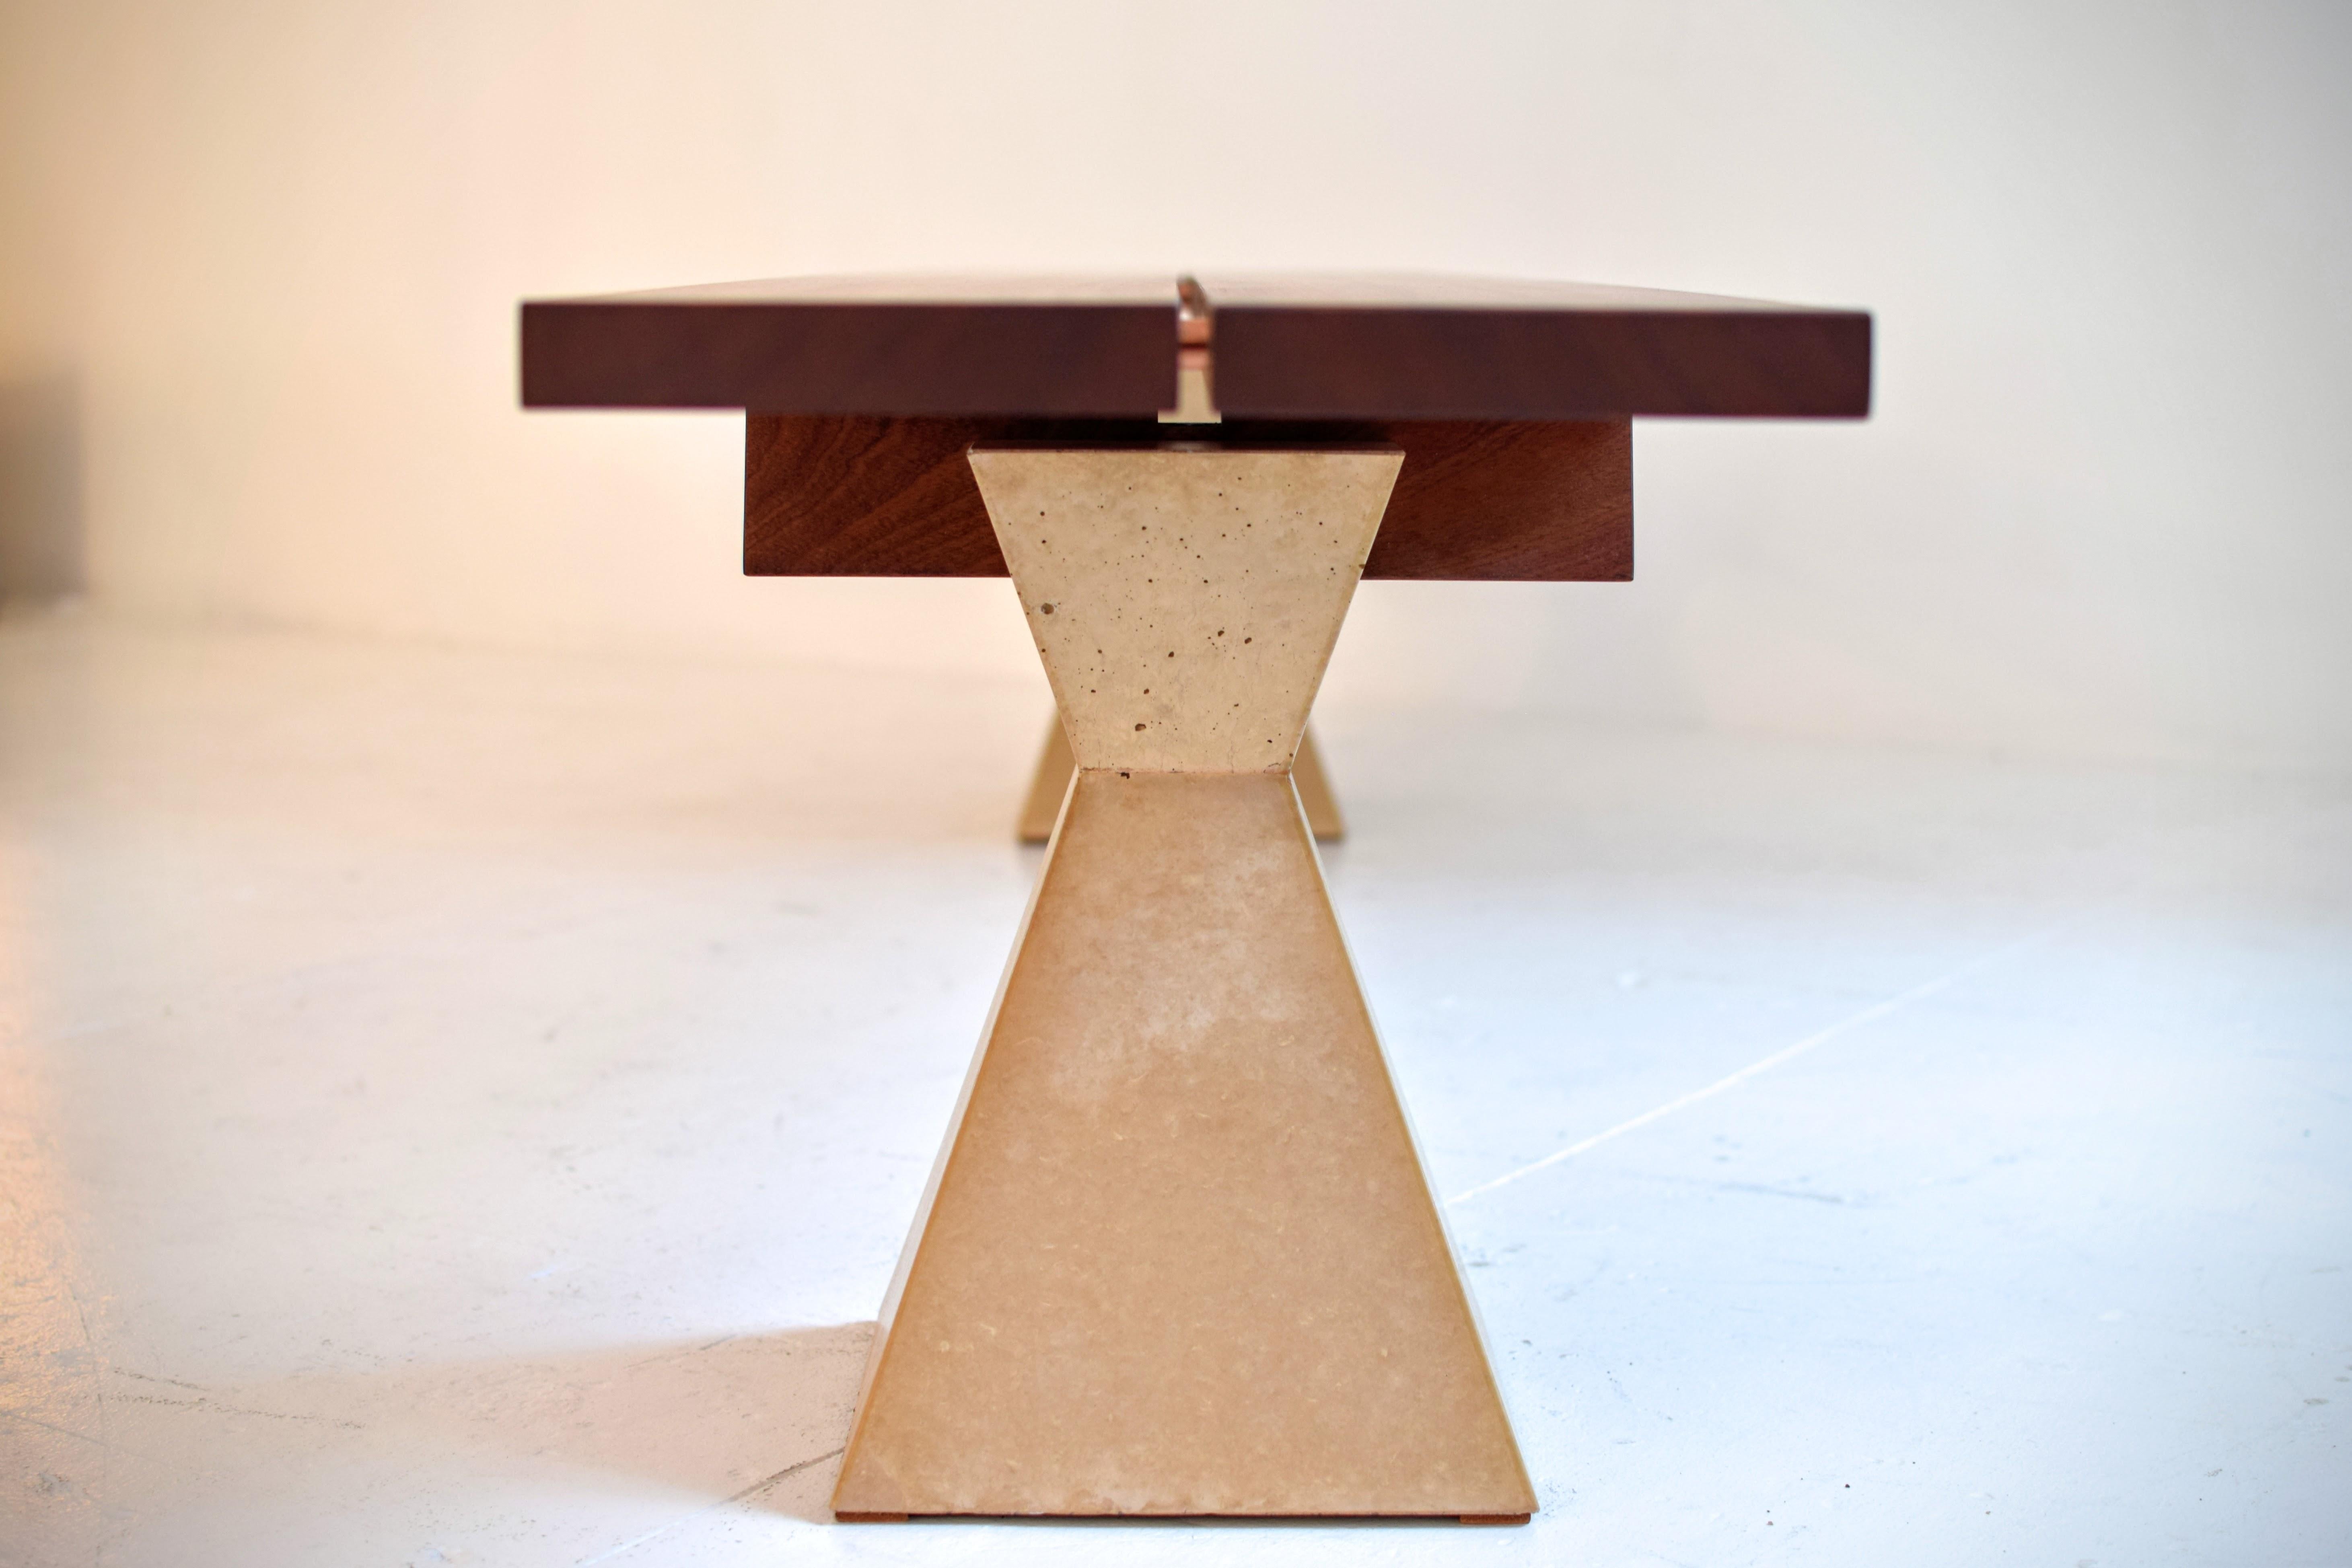 Dovetail stool

This distinctive stool combines multiple curves in wood, a geometric tower of concrete and the clever use of dovetail joinery. The split, wooden seat—power carved and polished in a perfect radial bowl—is linked with bronze pins and